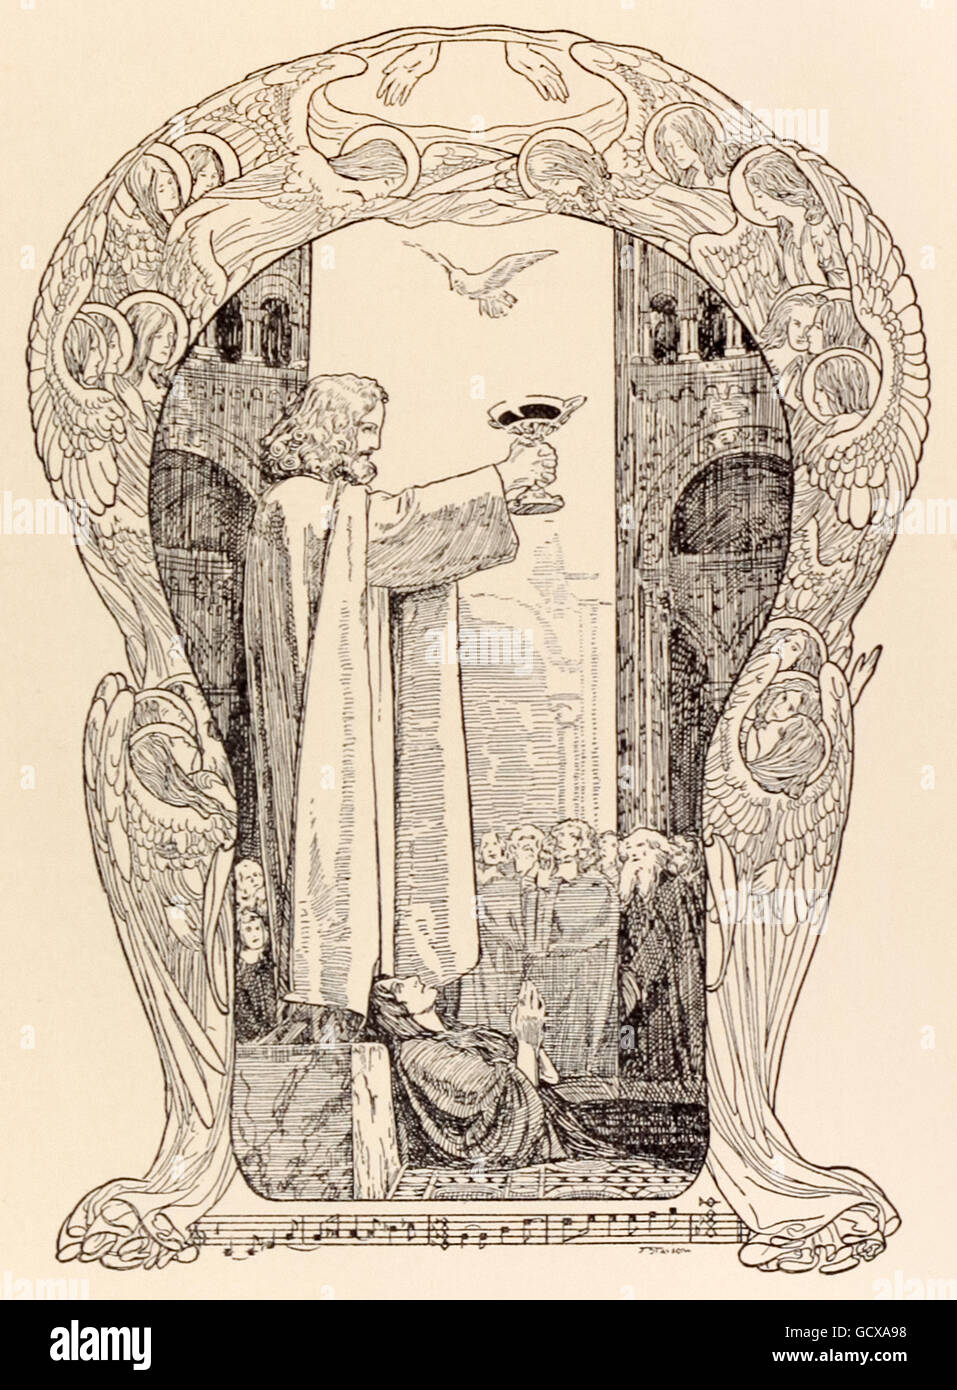 “Parsifal revealing the Holy Grail.” Franz Stassen (1869-1949) illustration for “Parsifal” by Richard Wagner (1813-1883). Act 3 - Parsifal commands the unveiling of the Grail as all kneel, Kundry dies as a white dove descends and hovers above Parsifal. See description for more information. Stock Photo